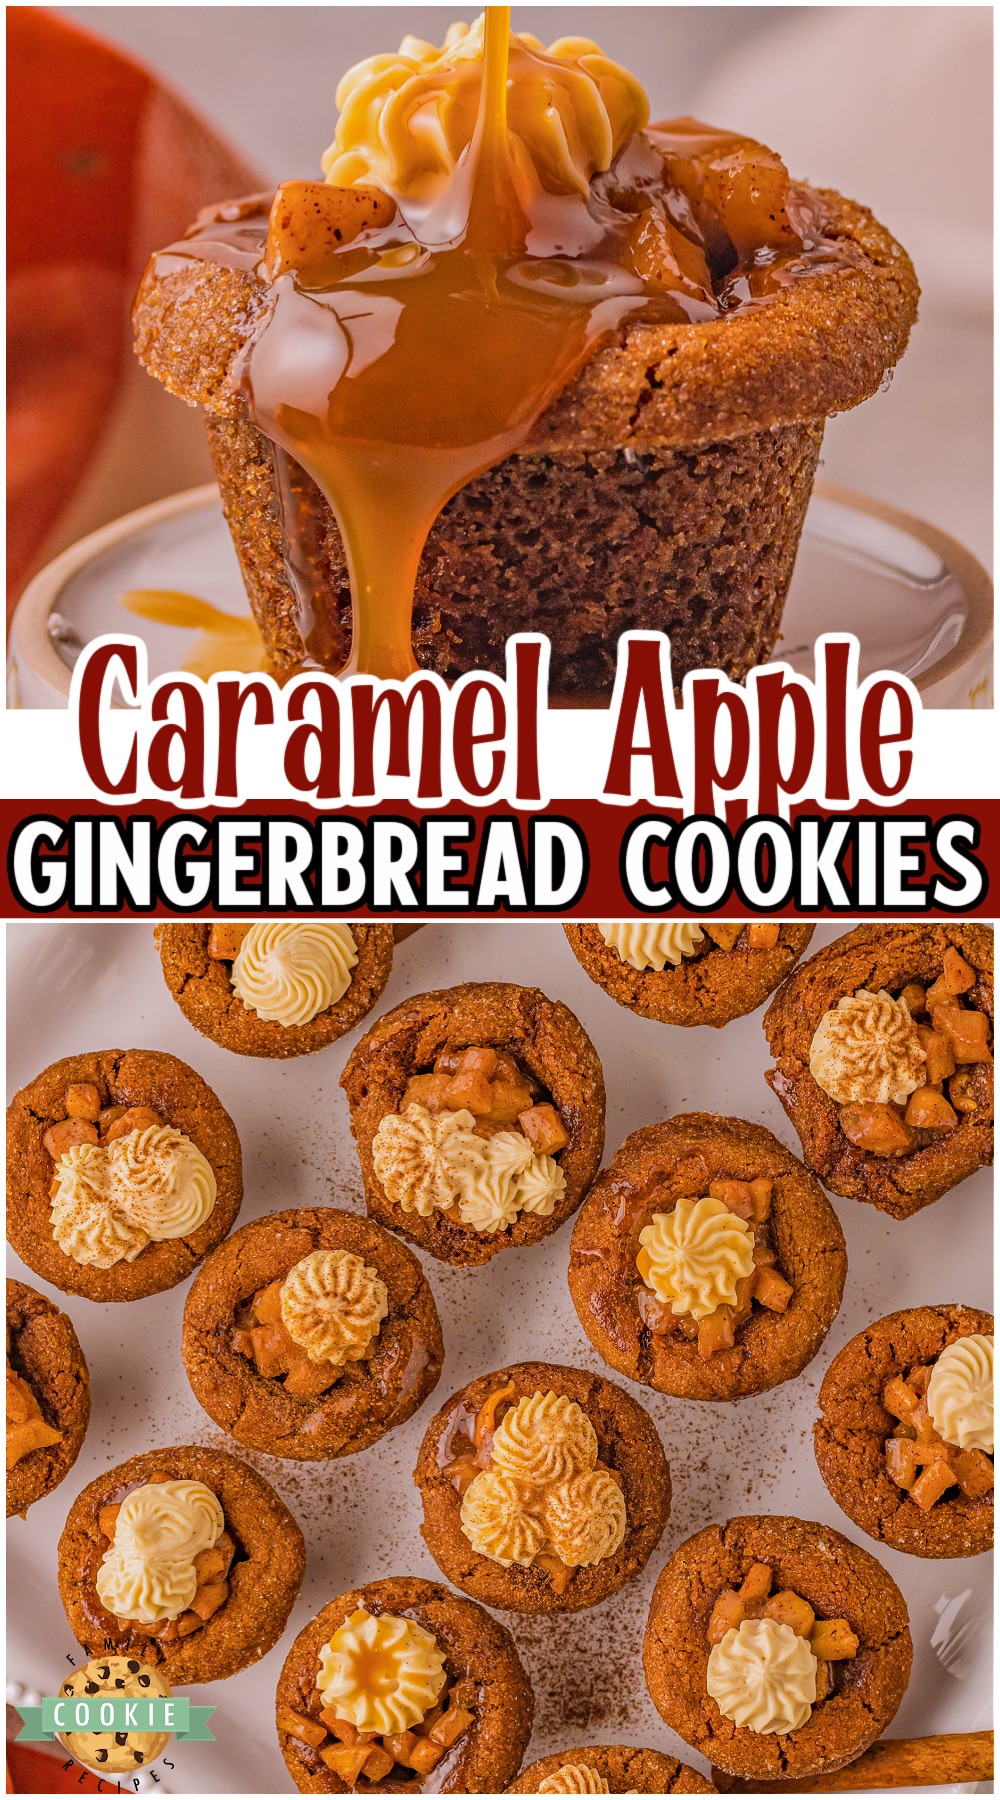 Caramel apple gingerbread cookie cups are made with apple filling inside a gingerbread cookie, topped with caramel cream cheese frosting & drizzled with caramel! This mashup of two classic desserts is a show stopper! via @buttergirls